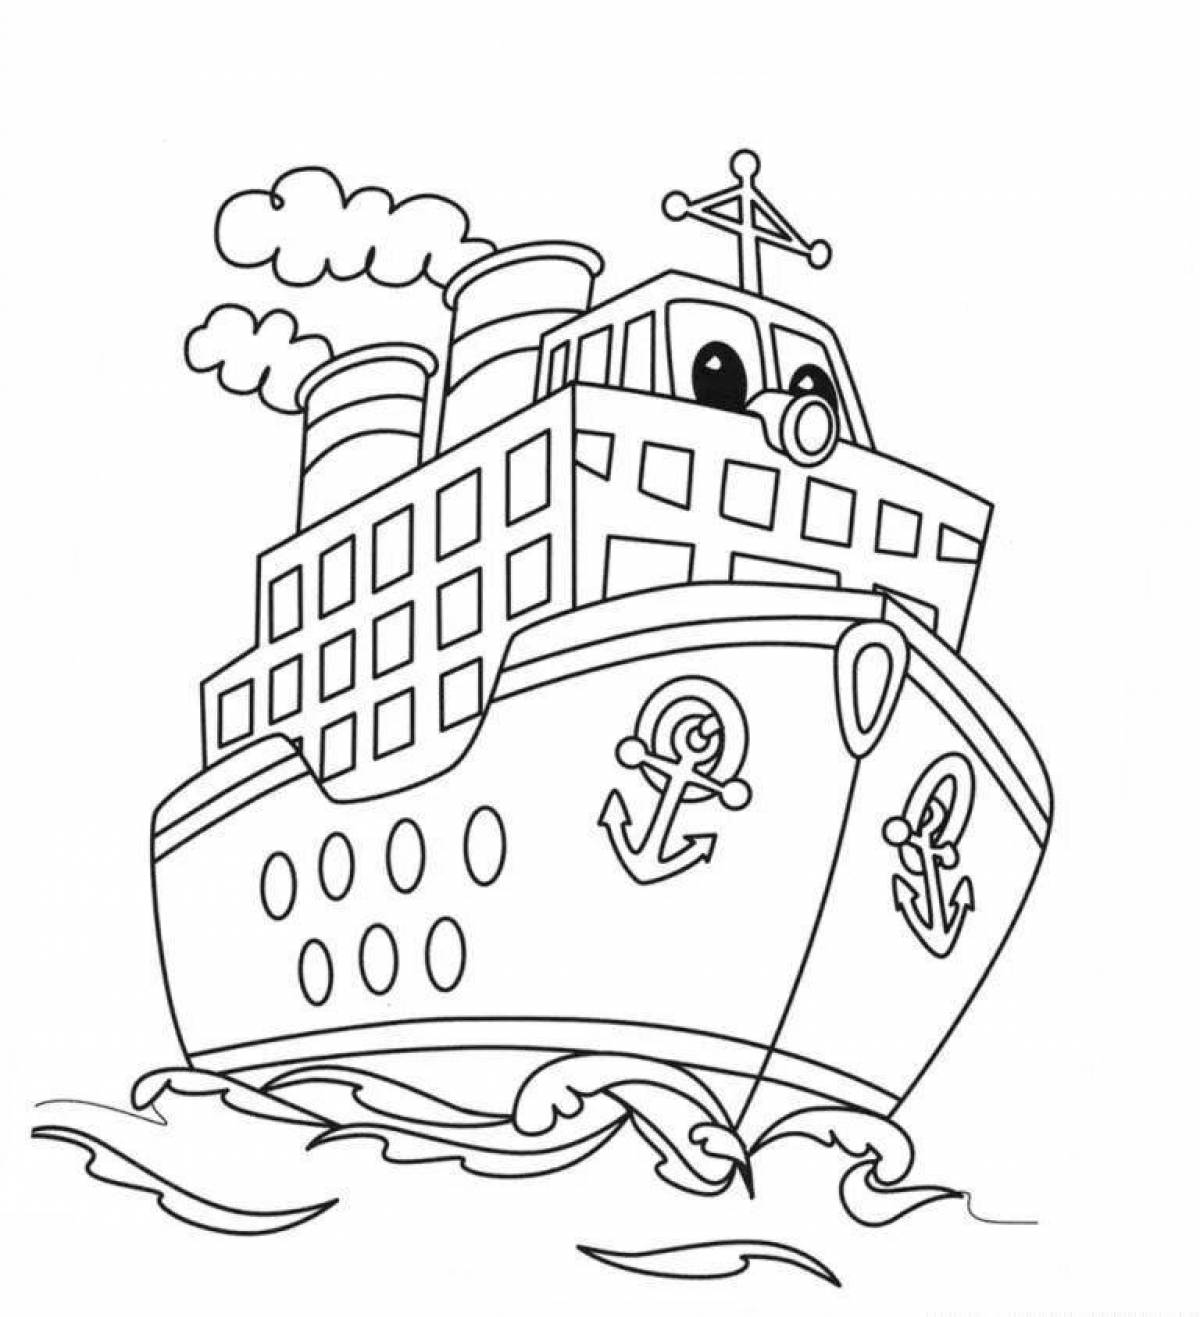 Luxury ship coloring book for boys